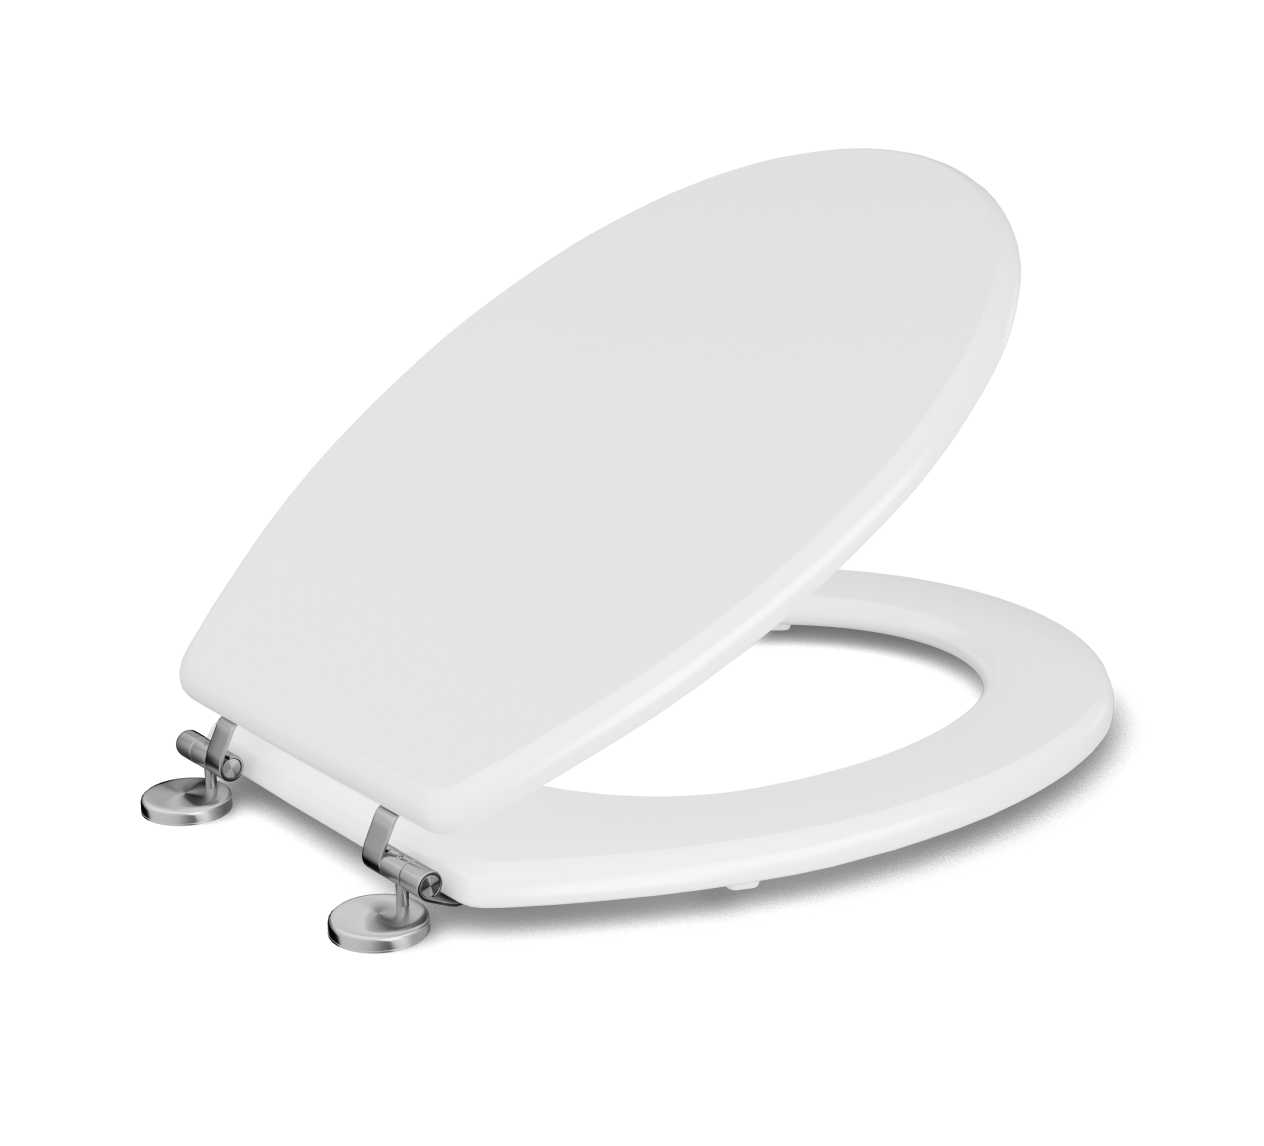 Adshank - Elongated Toilet Seat Cover - Suitable for Elongated 18 Oval -  Toilet Pot